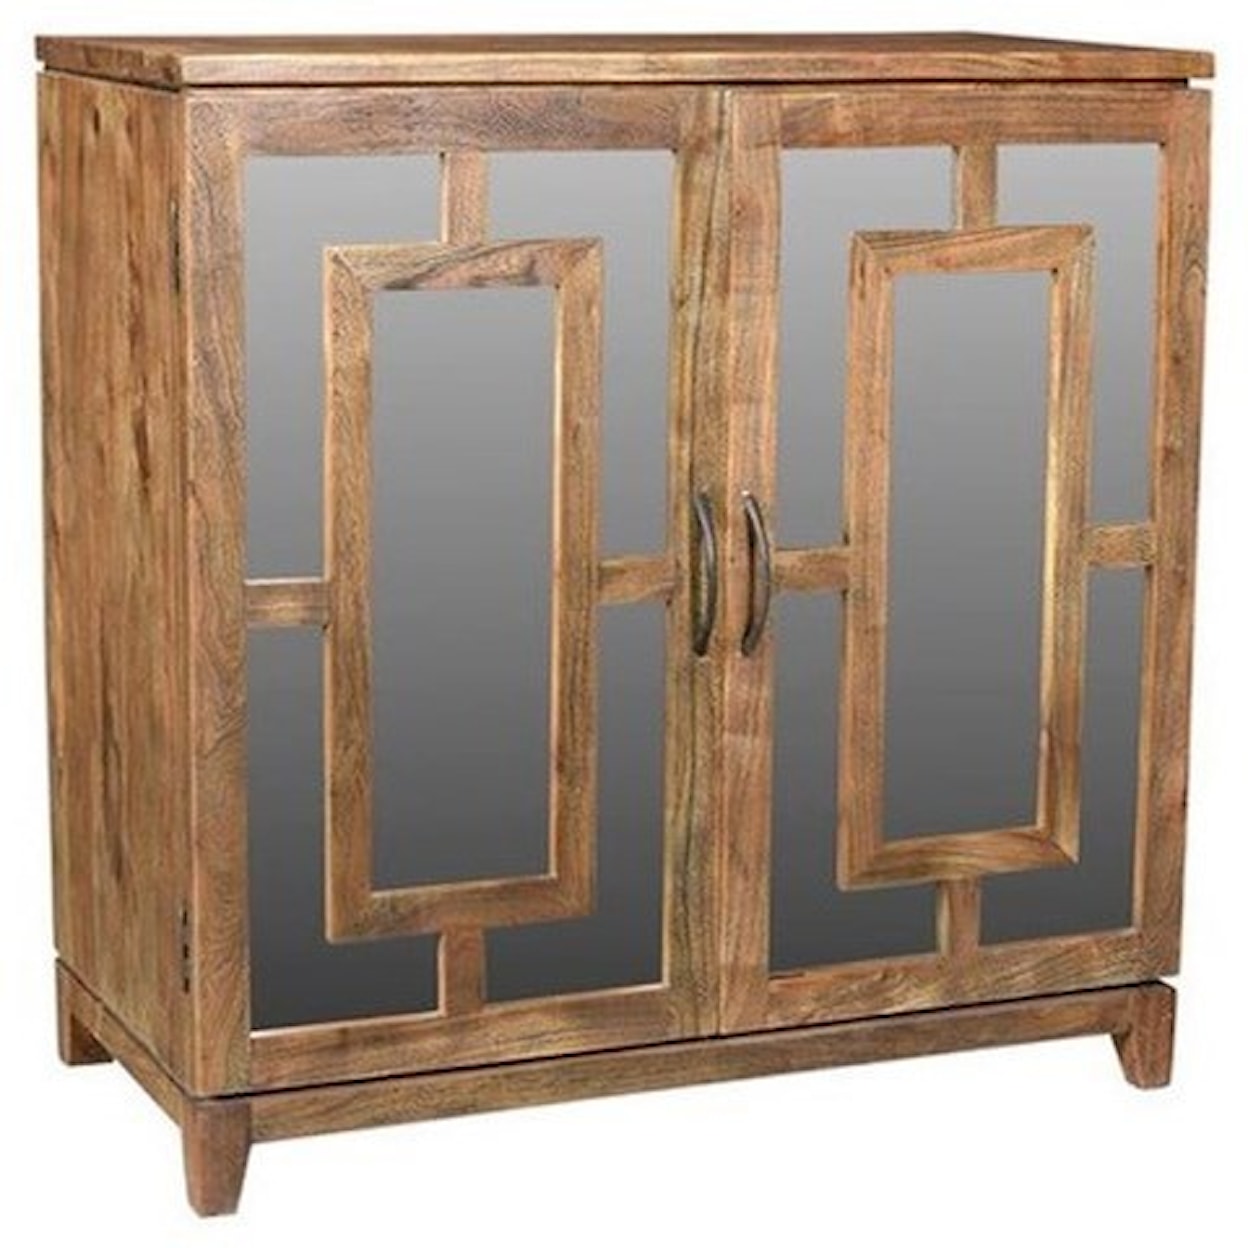 Crestview Collection Accent Furniture Acacia Wood Mirrored Cabinet